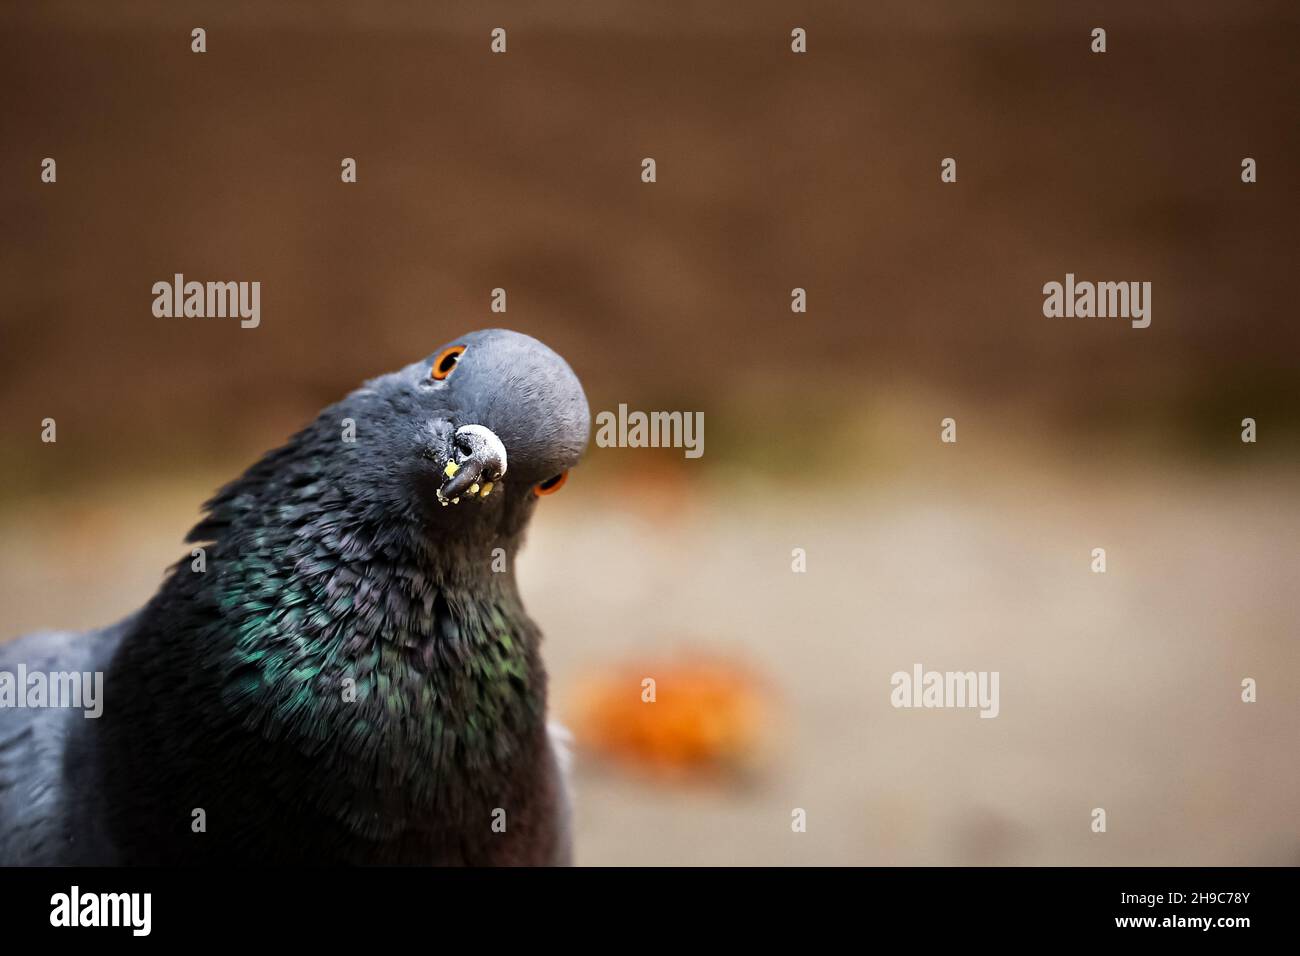 Lalitpur, Bagmati, Nepal. 6th Dec, 2021. Pigeon looks into camera curiosly while eating. Dec 6 2021 Credit: Amit Machamasi/ZUMA Wire/Alamy Live News Stock Photo